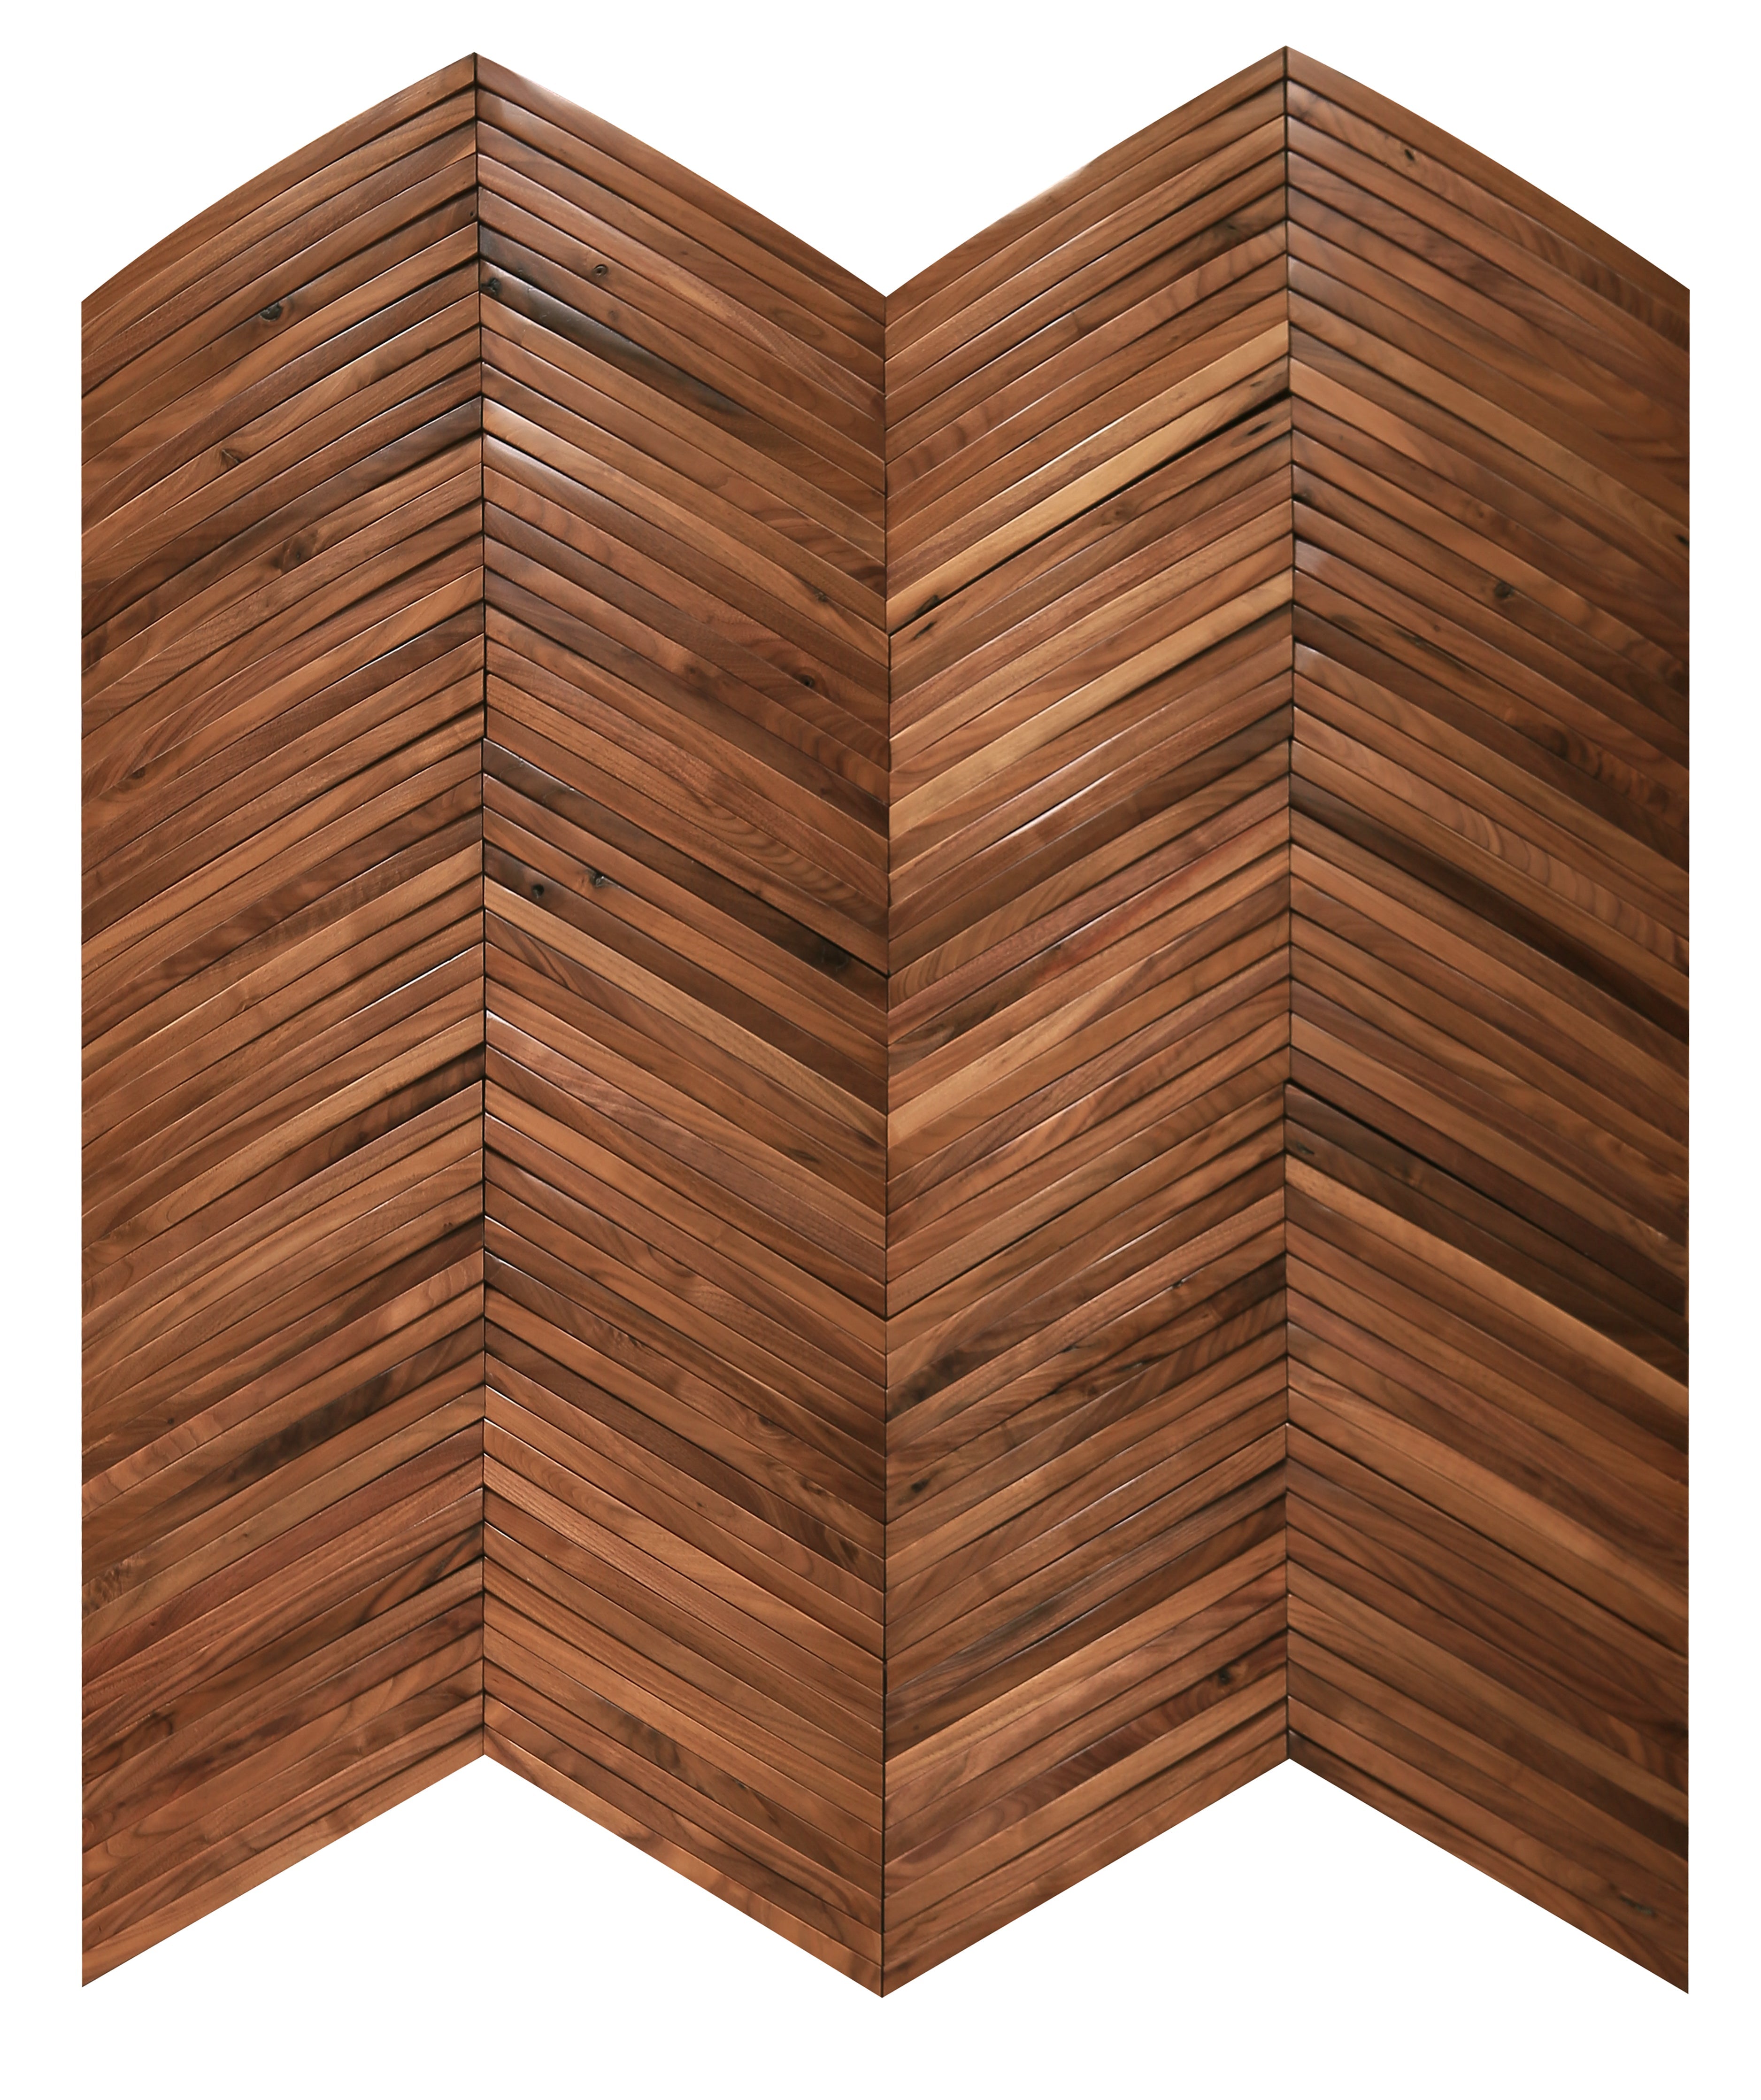 duchateau inceptiv ark chevron american walnut three dimensional wall natural wood panel conversion varnish for interior use distributed by surface group international